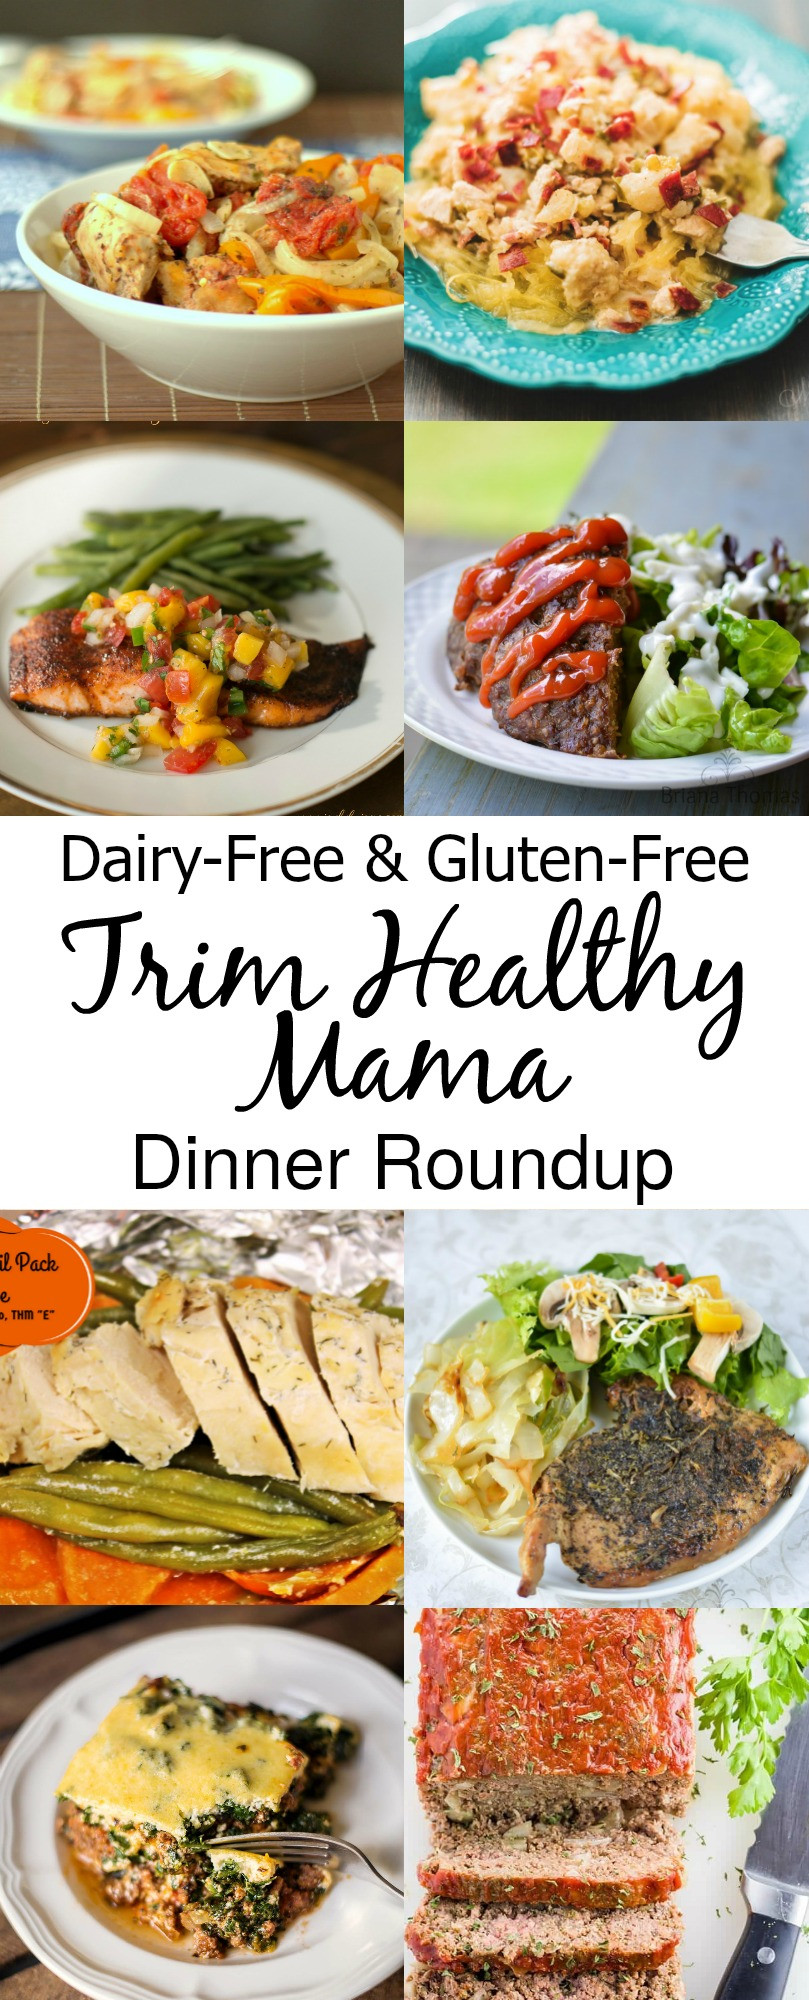 Gluten And Dairy Free Recipes For Dinner
 Dairy Free and Gluten Free Trim Healthy Mama Dinners